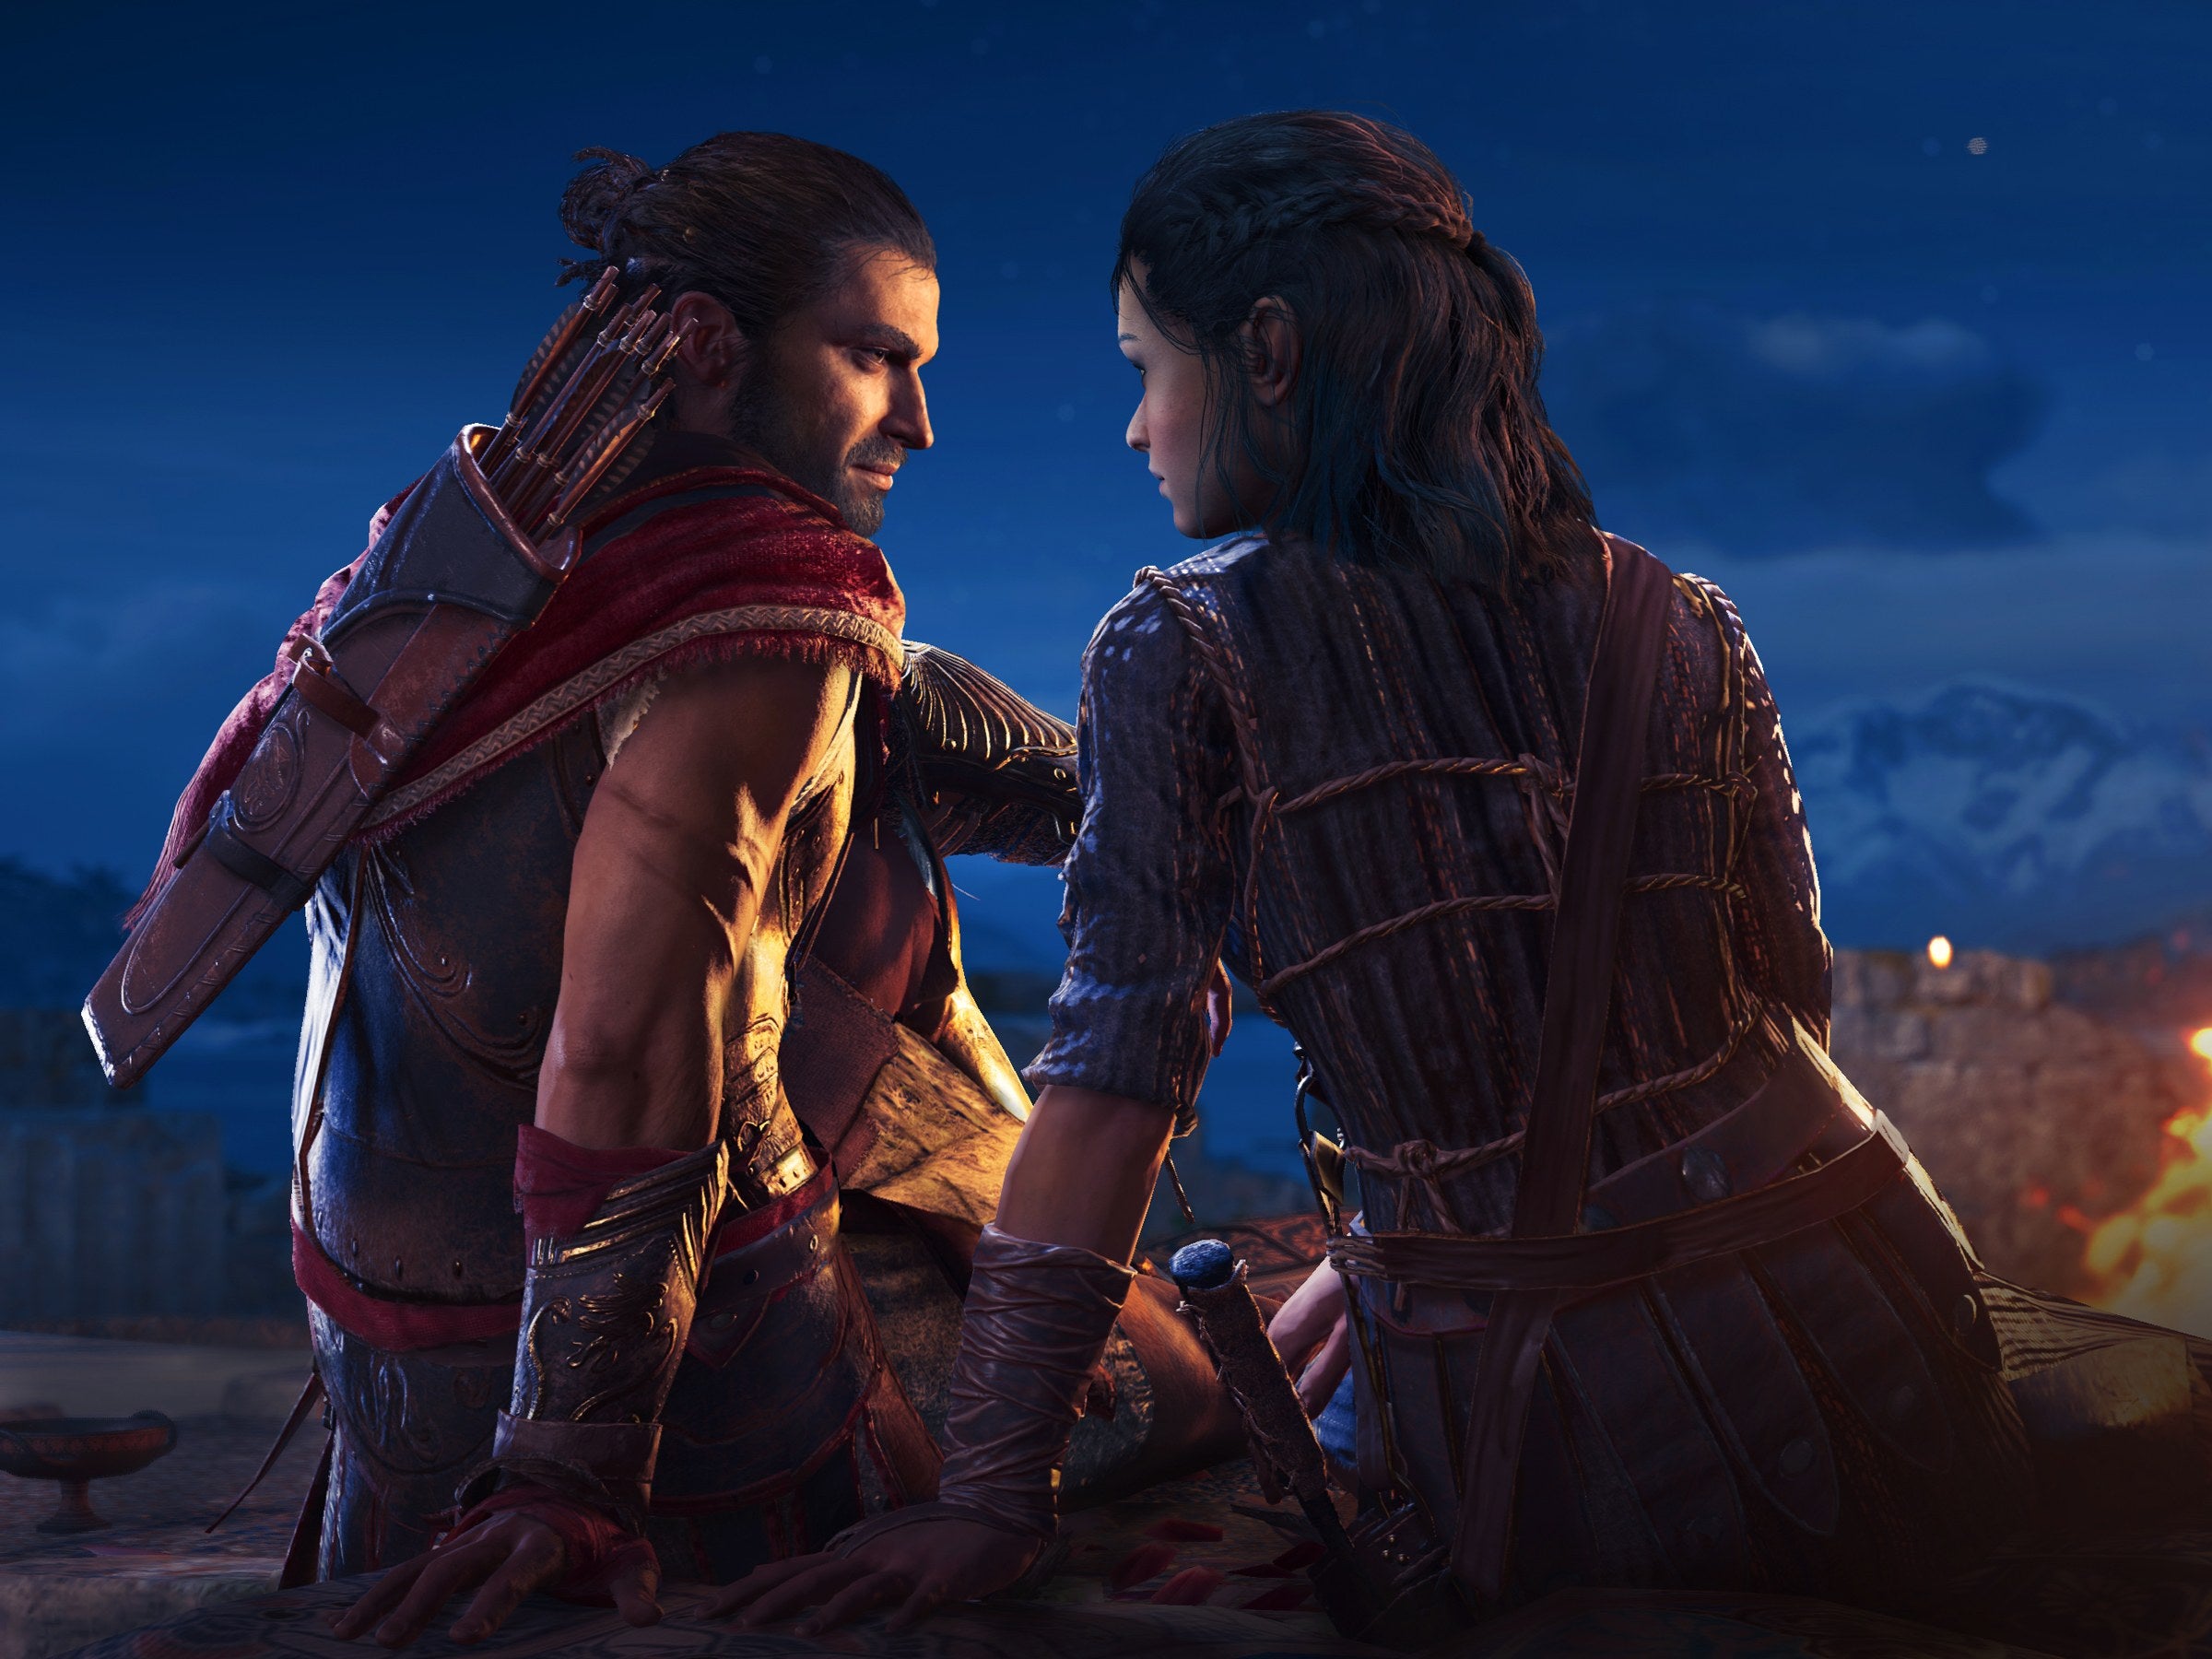 Image for Ubisoft apologises for forcing heterosexual romance in Assassin's Creed Odyssey DLC